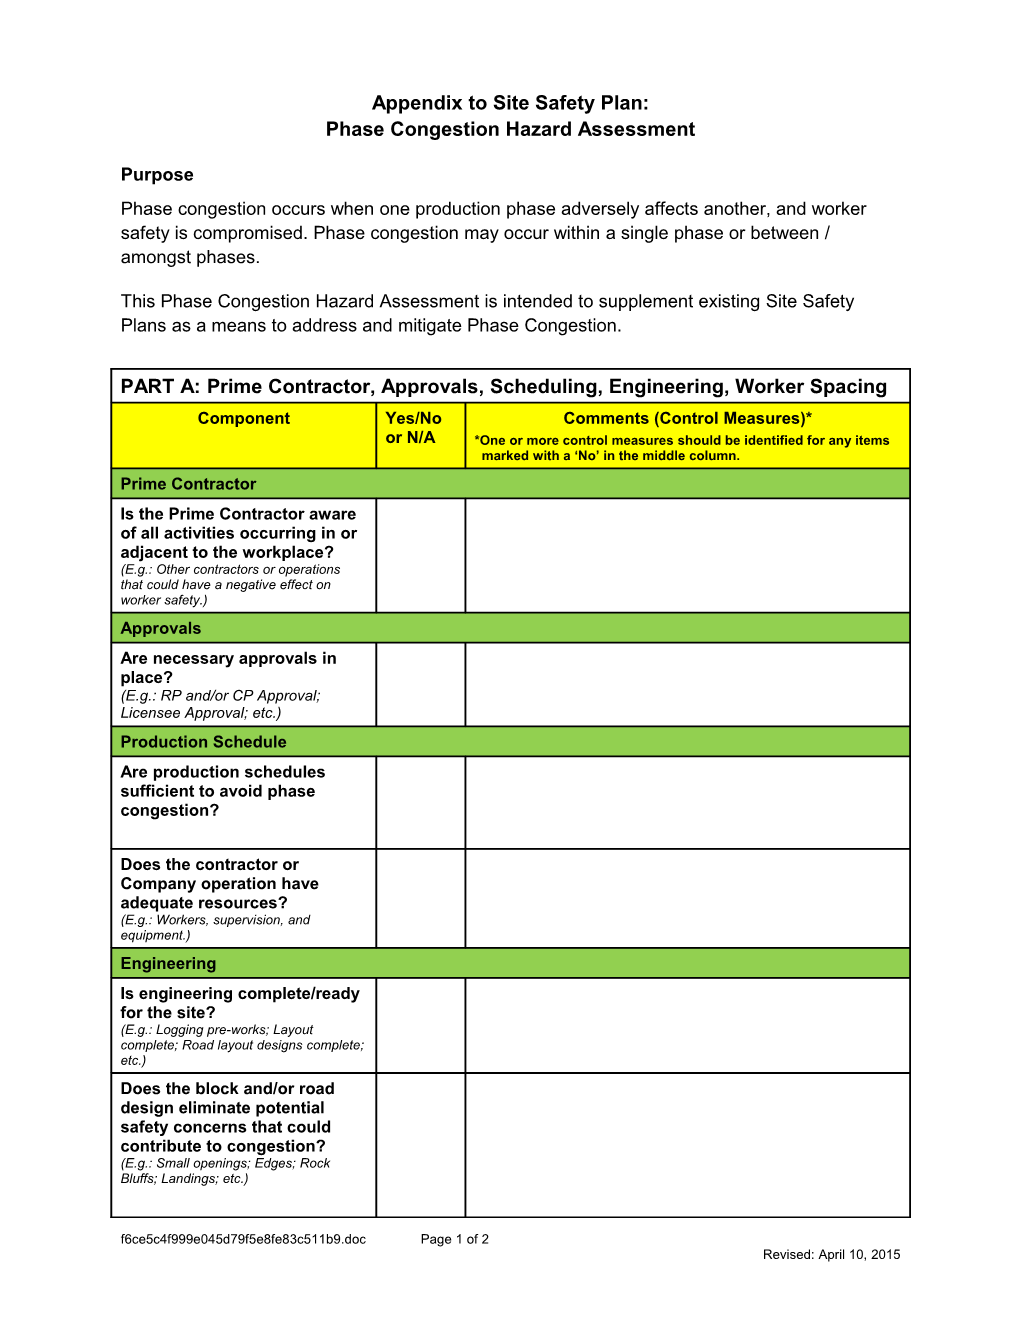 Appendix to Site Safety Plan: Phase Congestion Hazard Assessment Form